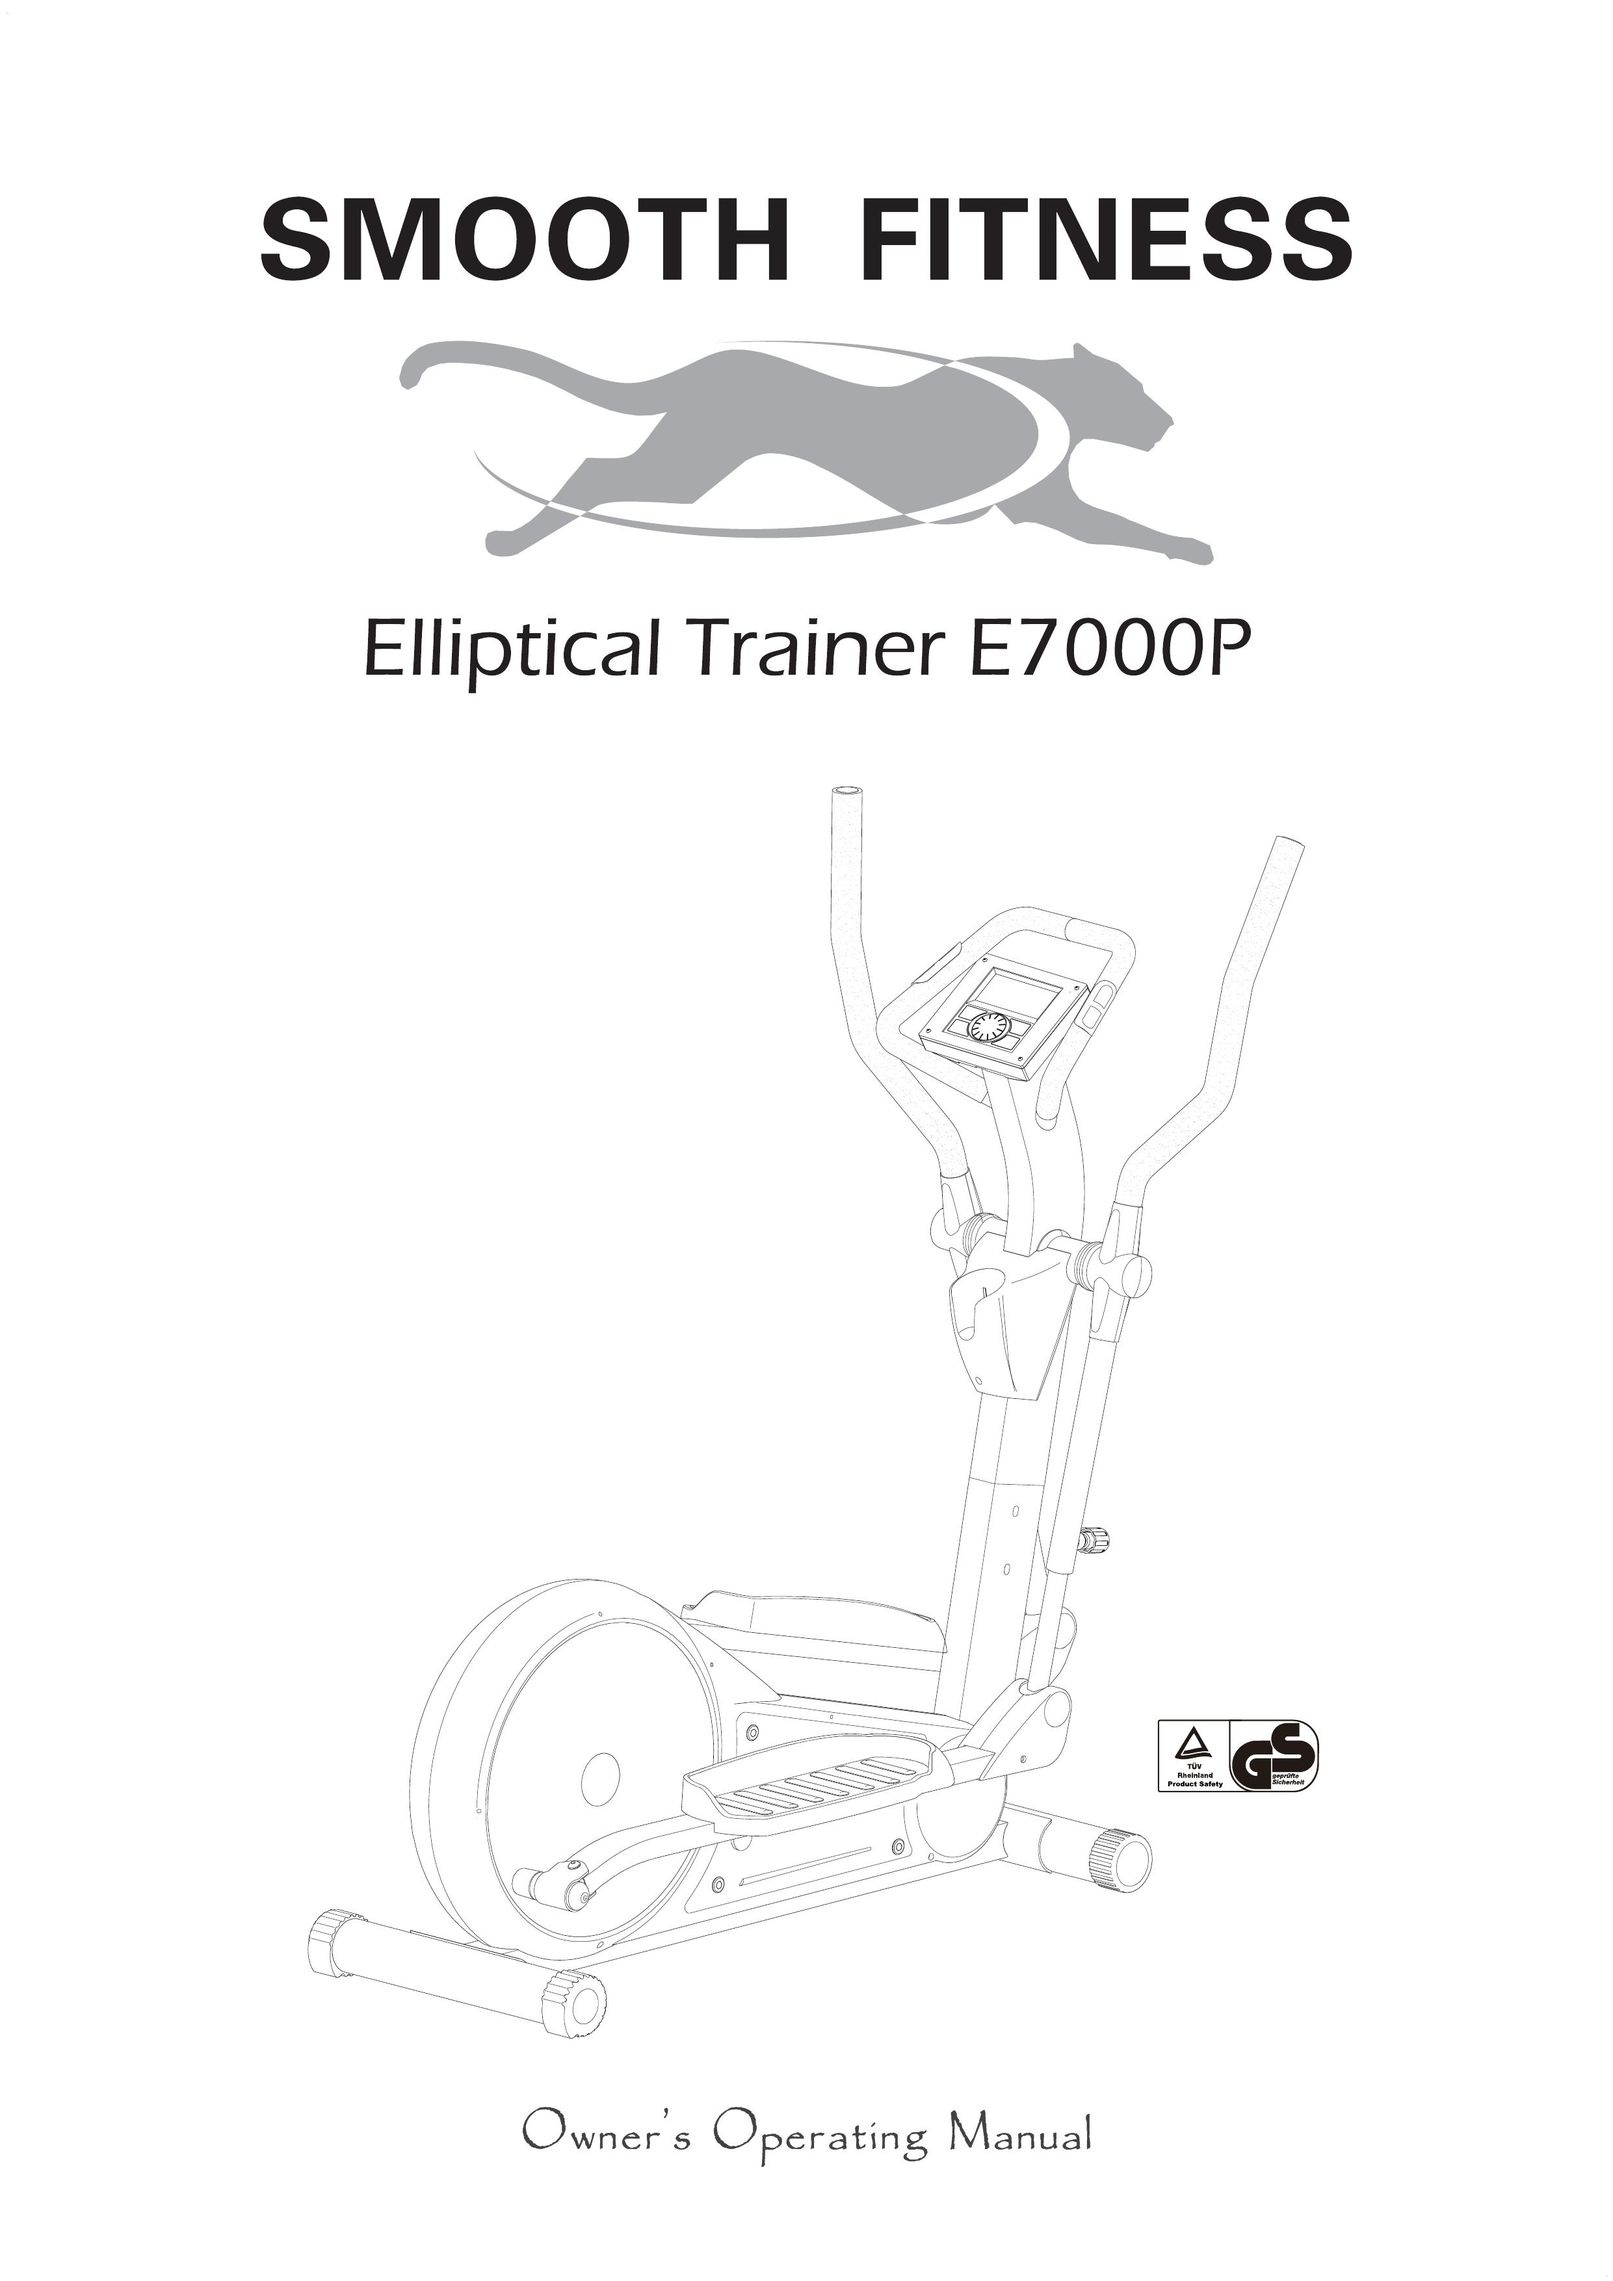 Smooth Fitness E7000P Elliptical Trainer User Manual